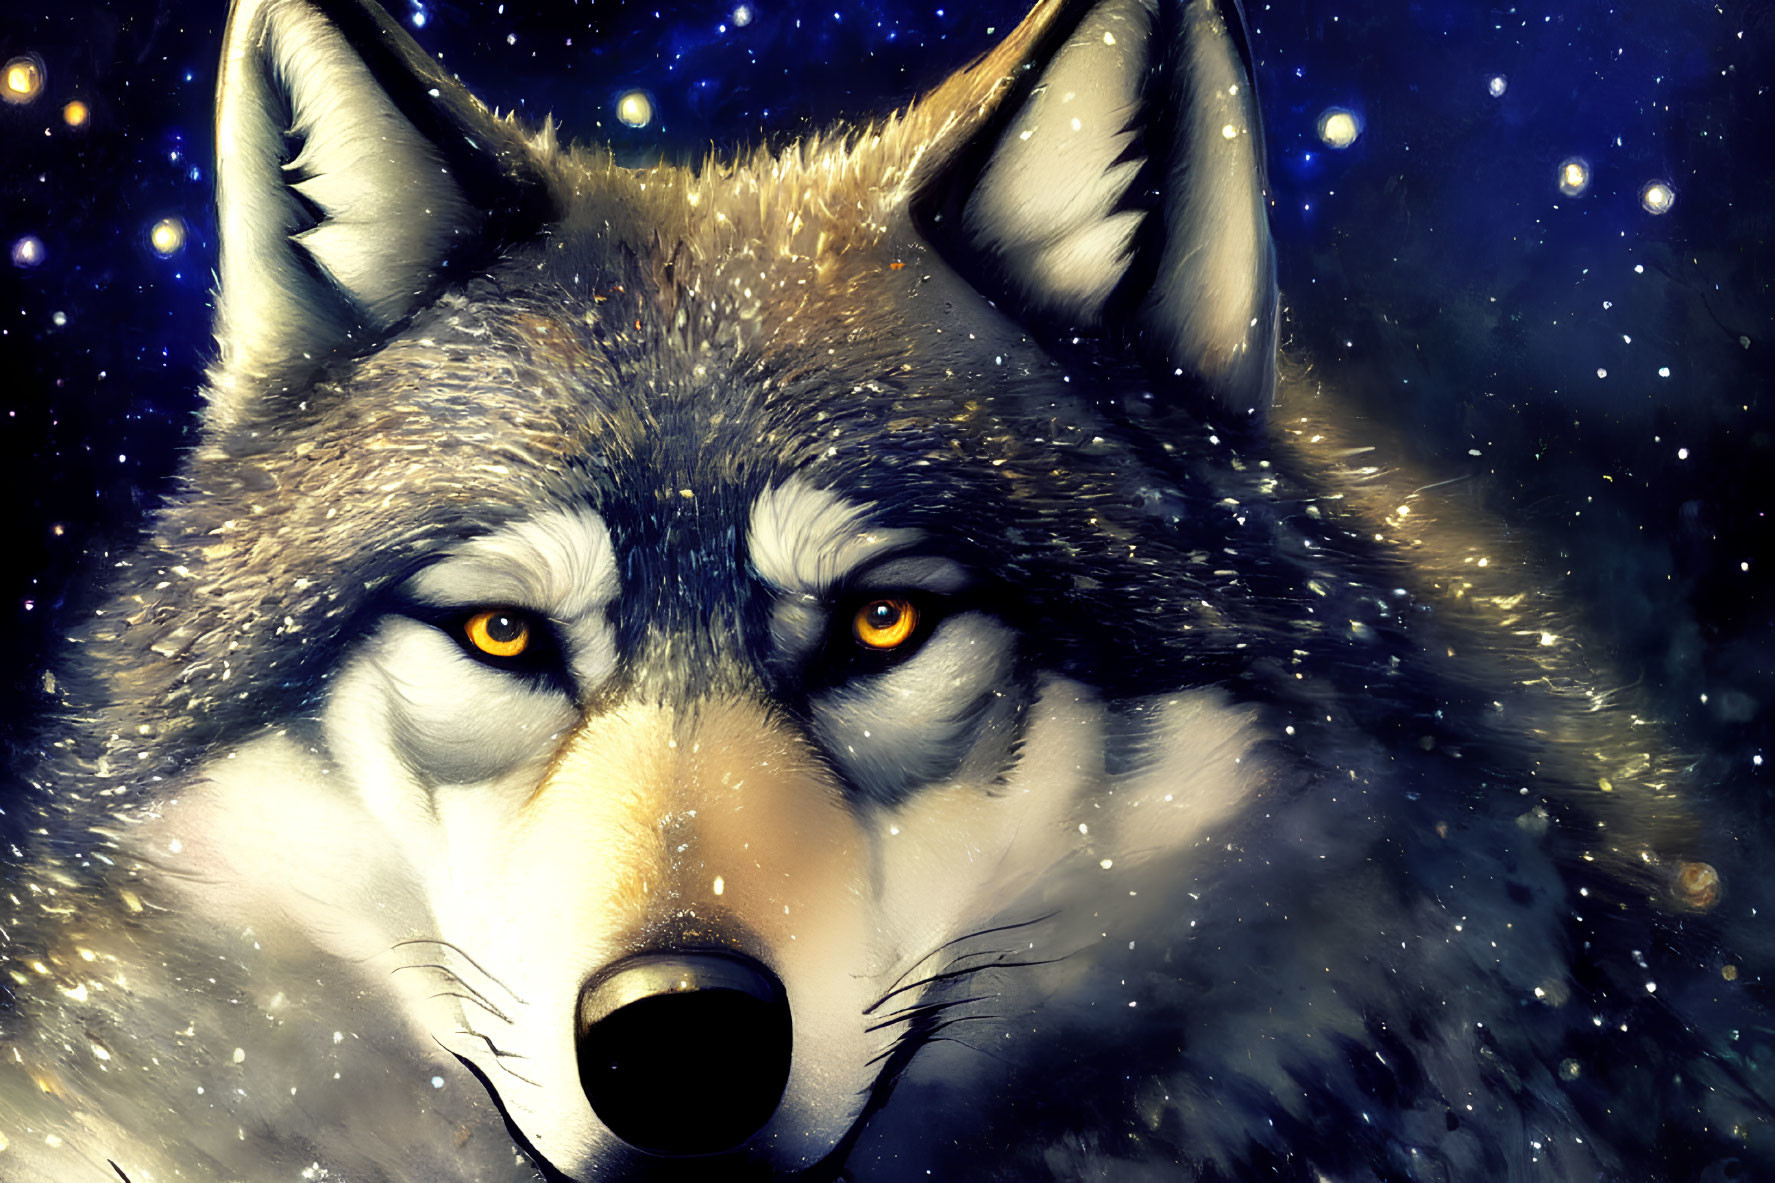 Digital artwork: Wolf's face with intense yellow eyes on starry night sky background